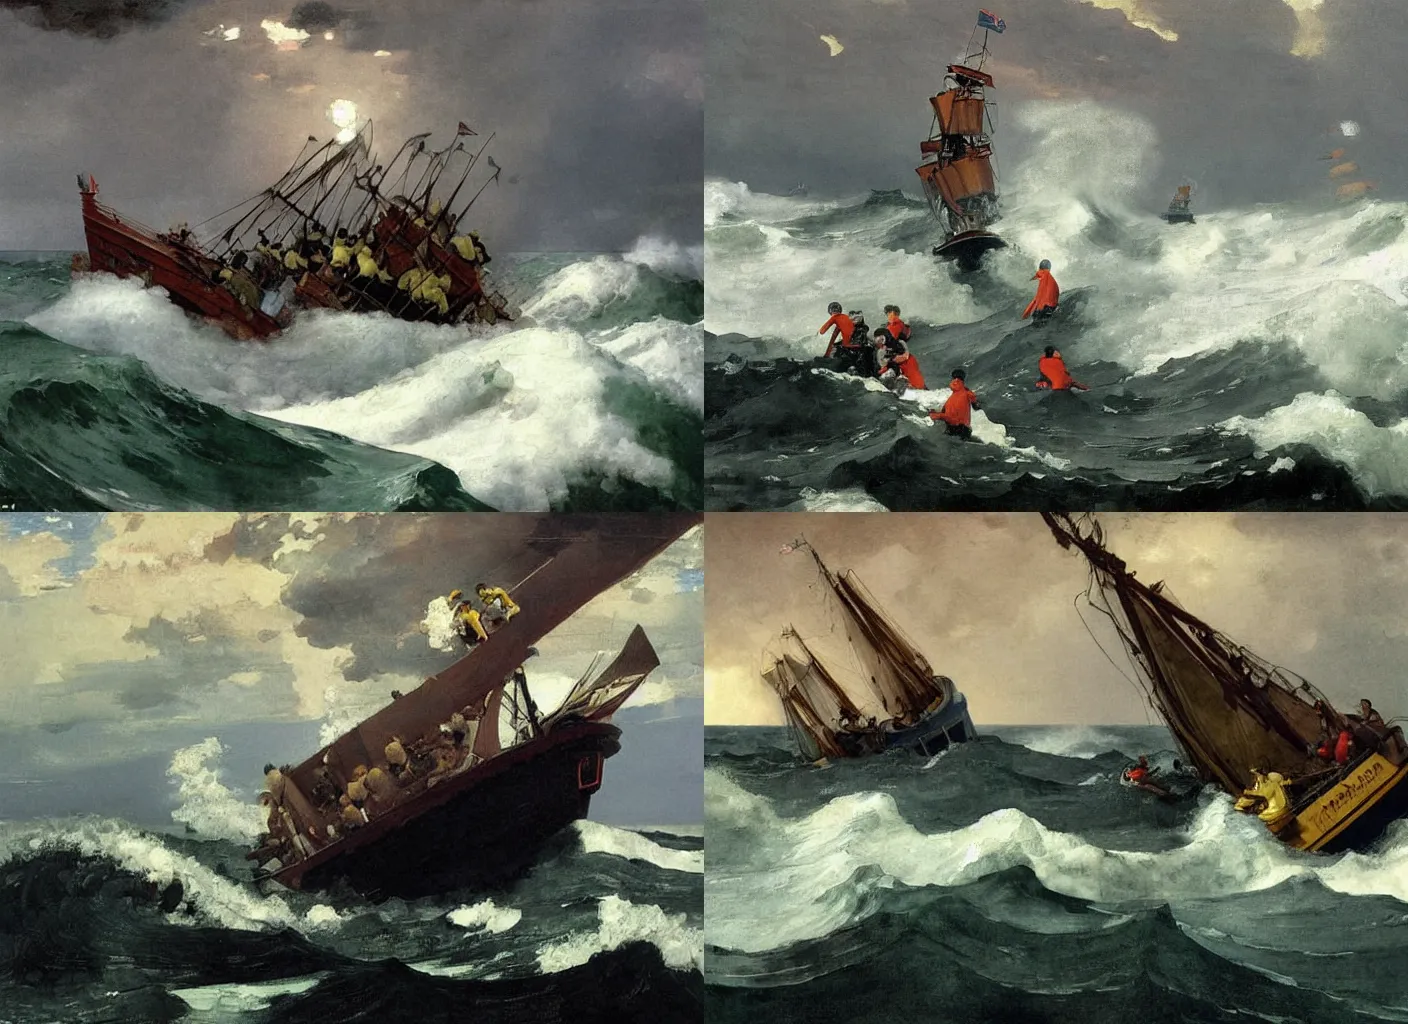 Prompt: portrait of Minions manning a ship being tossed about by the stormy sea painted by Winslow Homer, dramatic nautical scene, dangerous waves, masterwork painting of the tumultuous North Sea